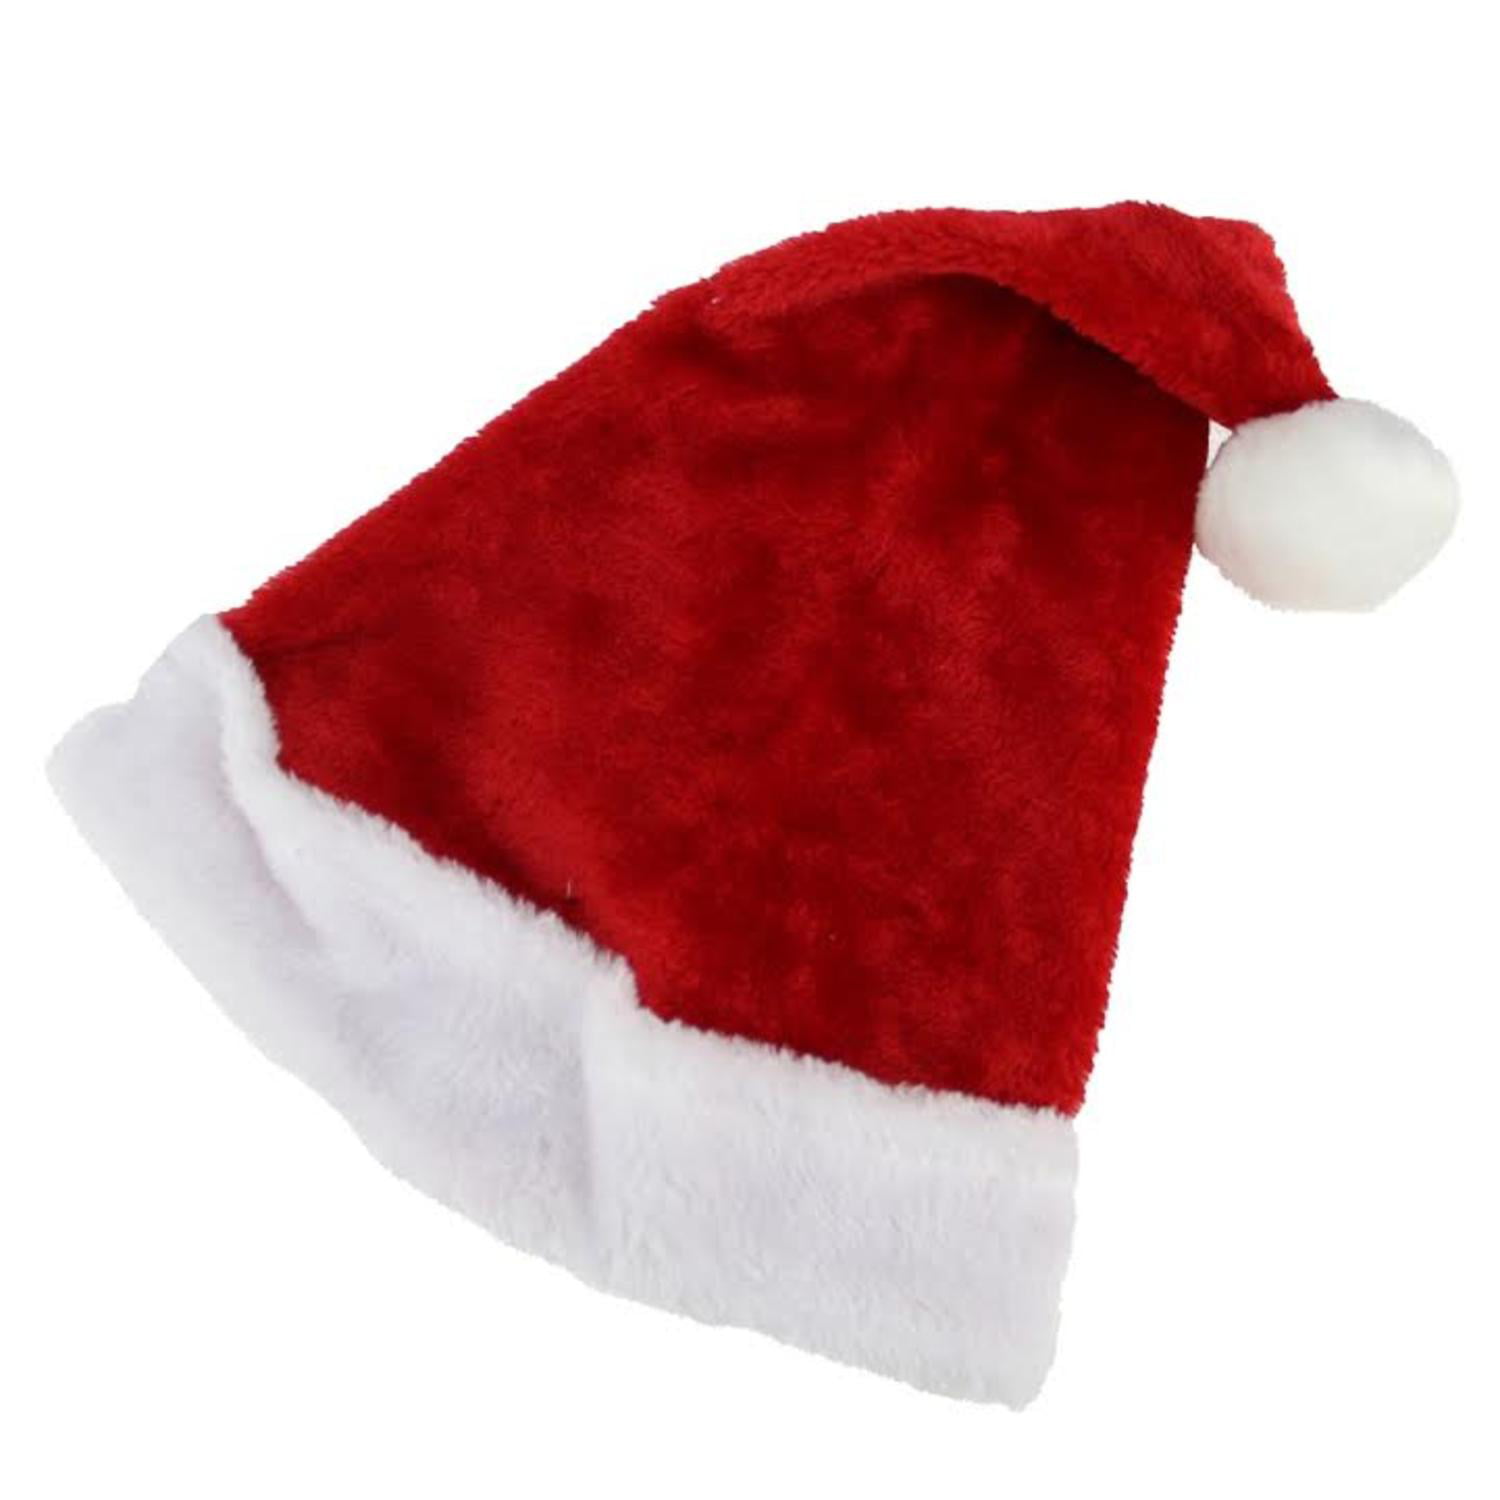 where to buy santa claus hat